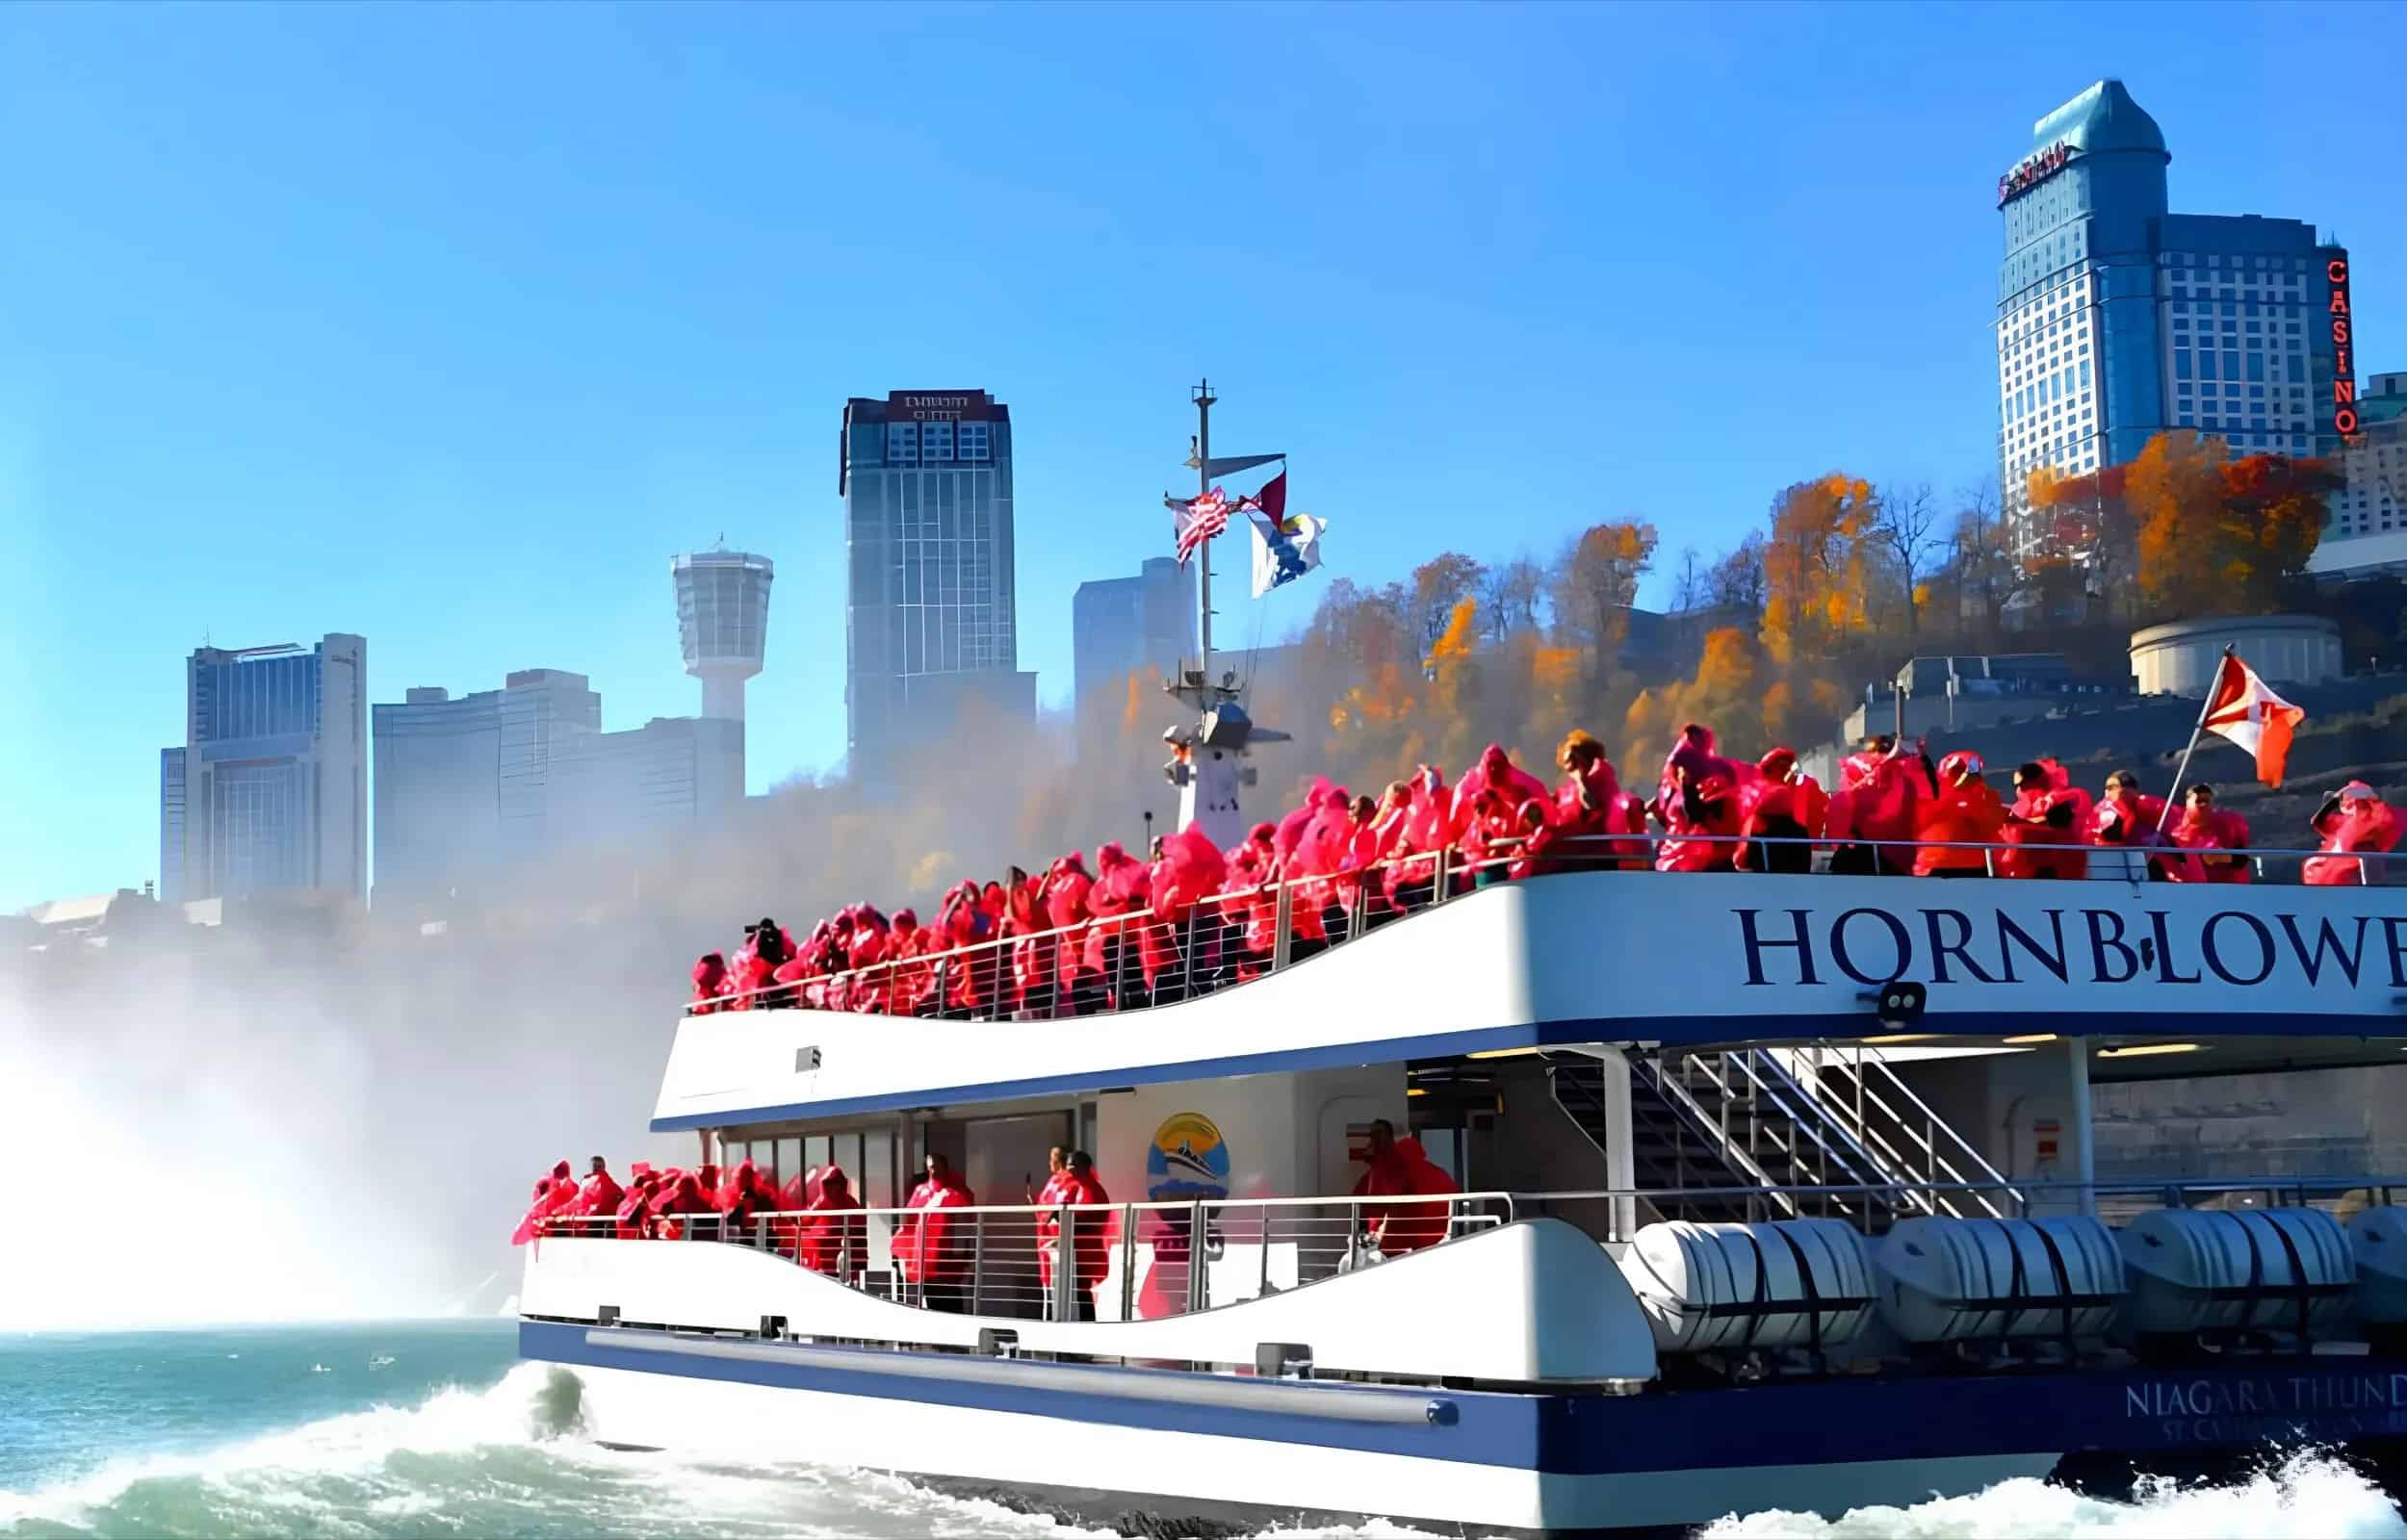 Hornblower Boat Cruise From Toronto Tour